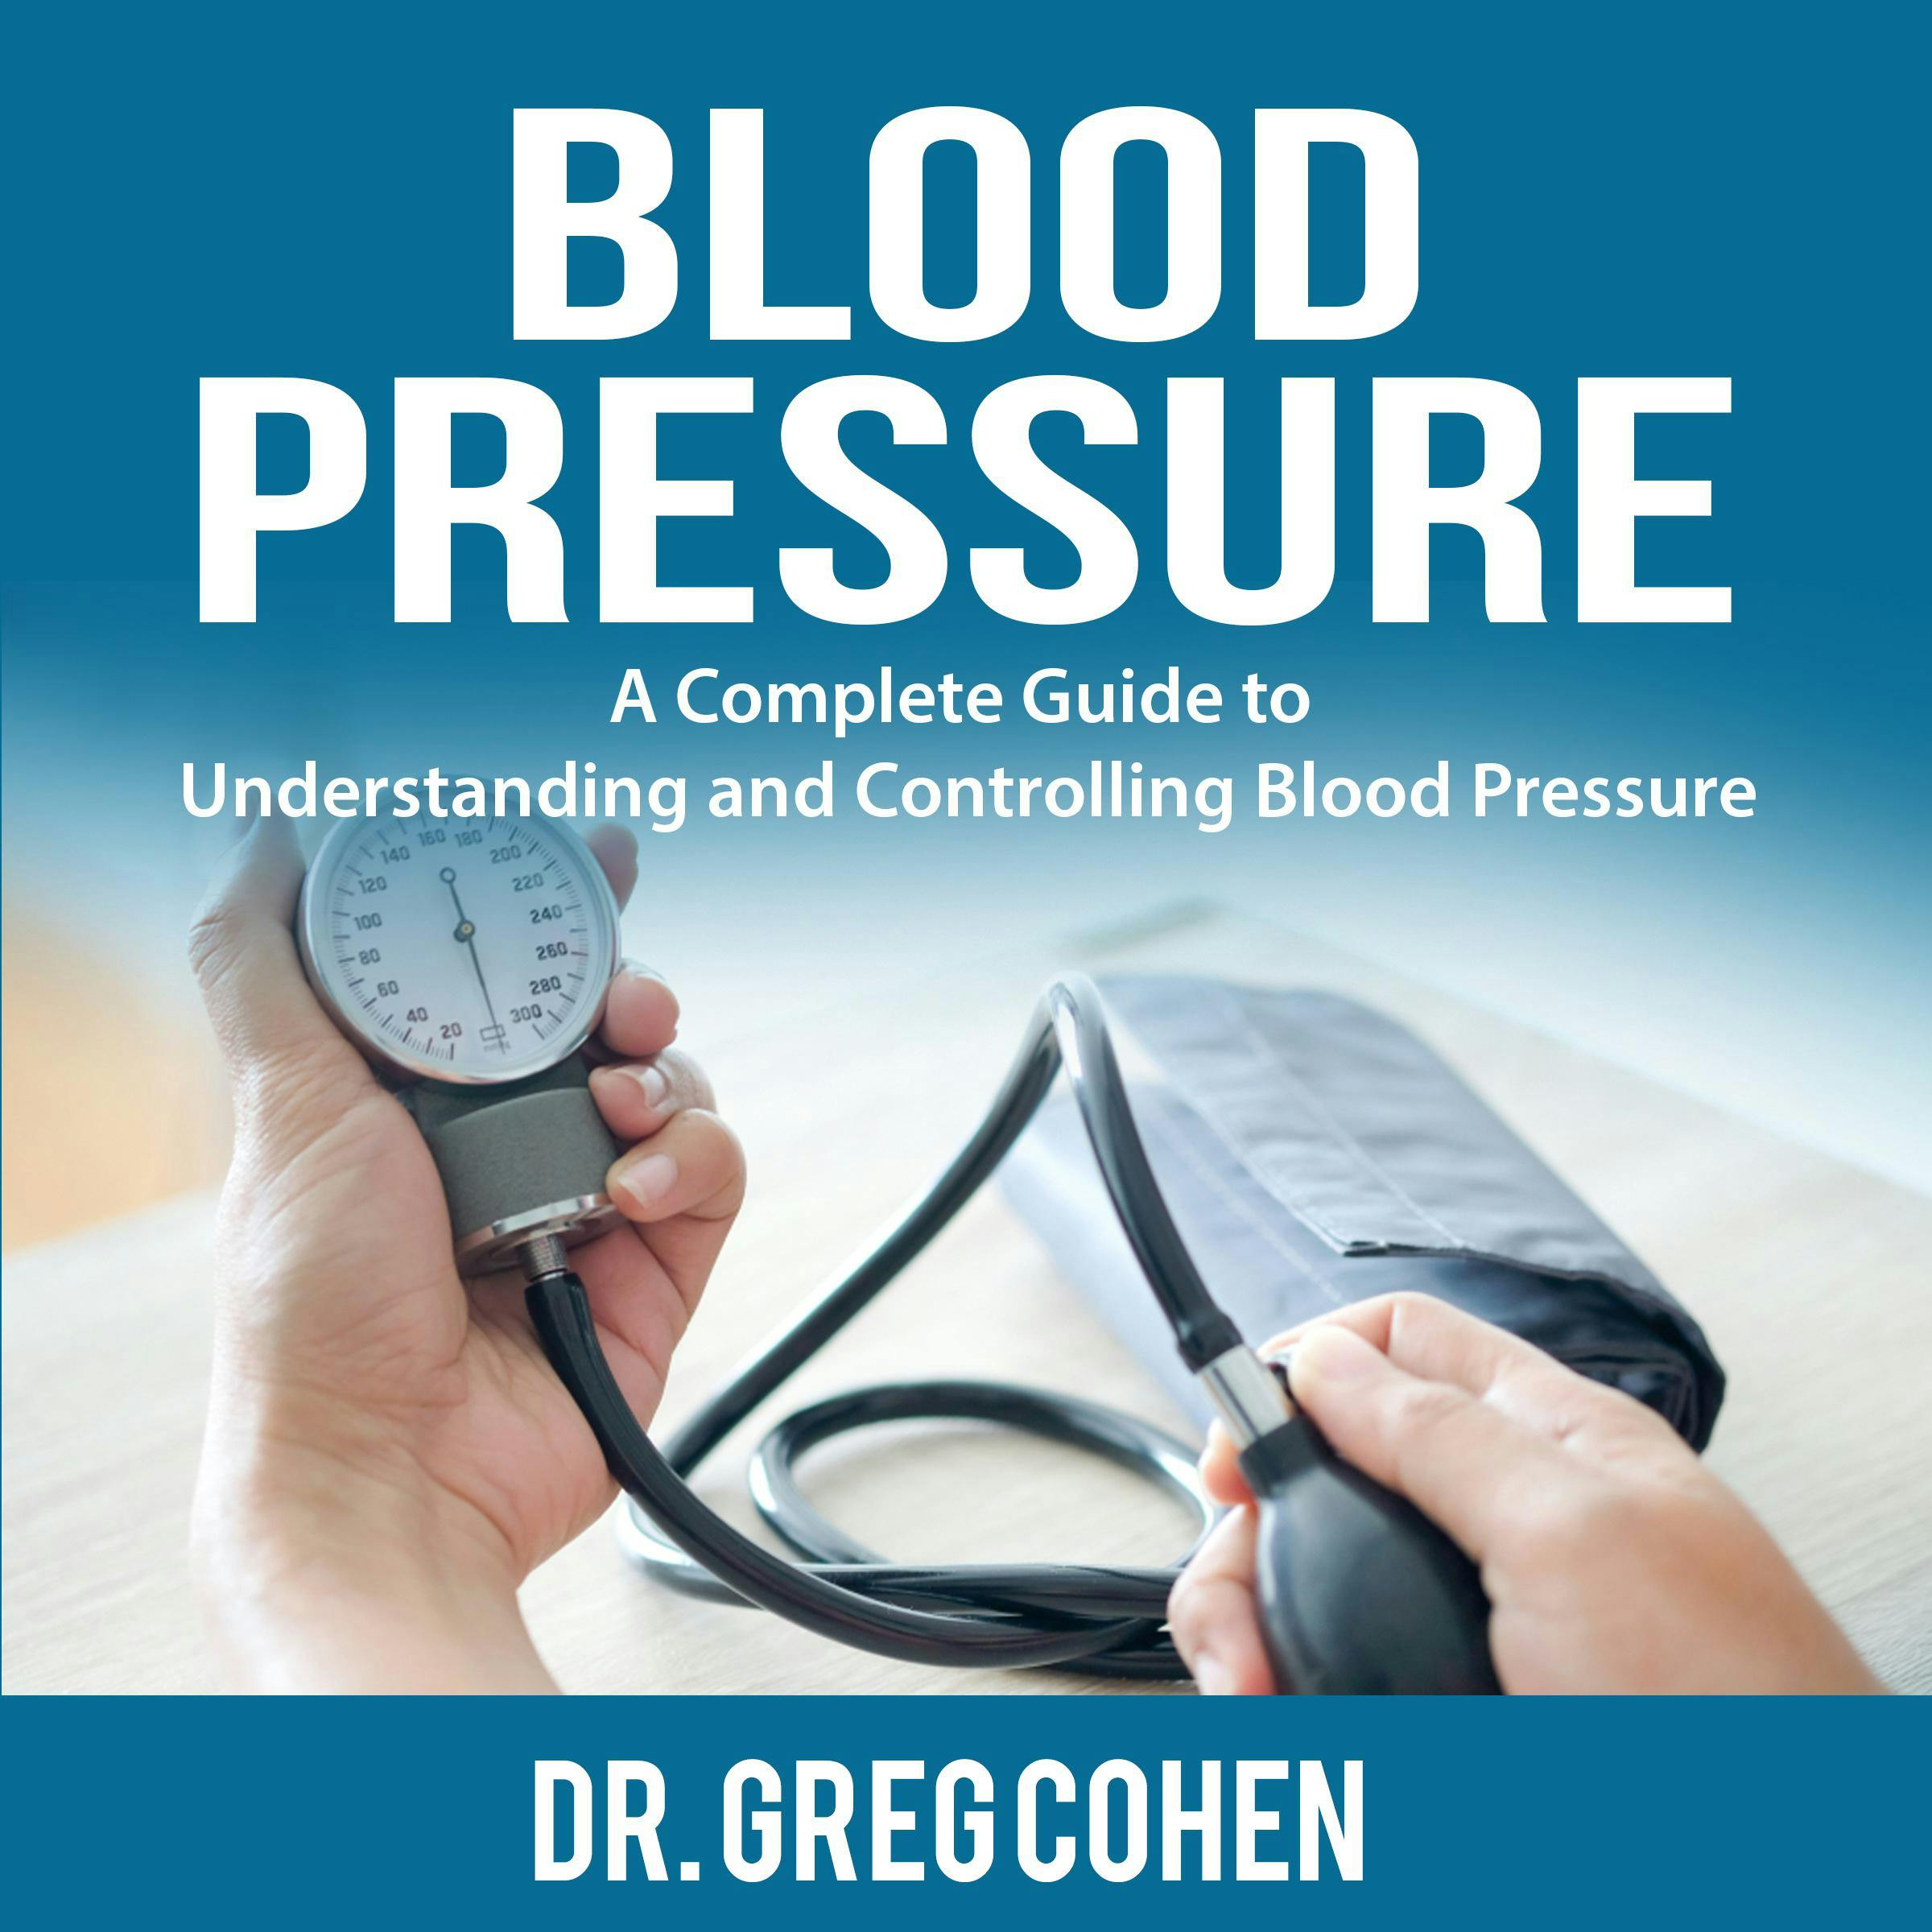 Blood Pressure: A Complete Guide to Understanding and Controlling Blood Pressure - Dr. Greg Cohen